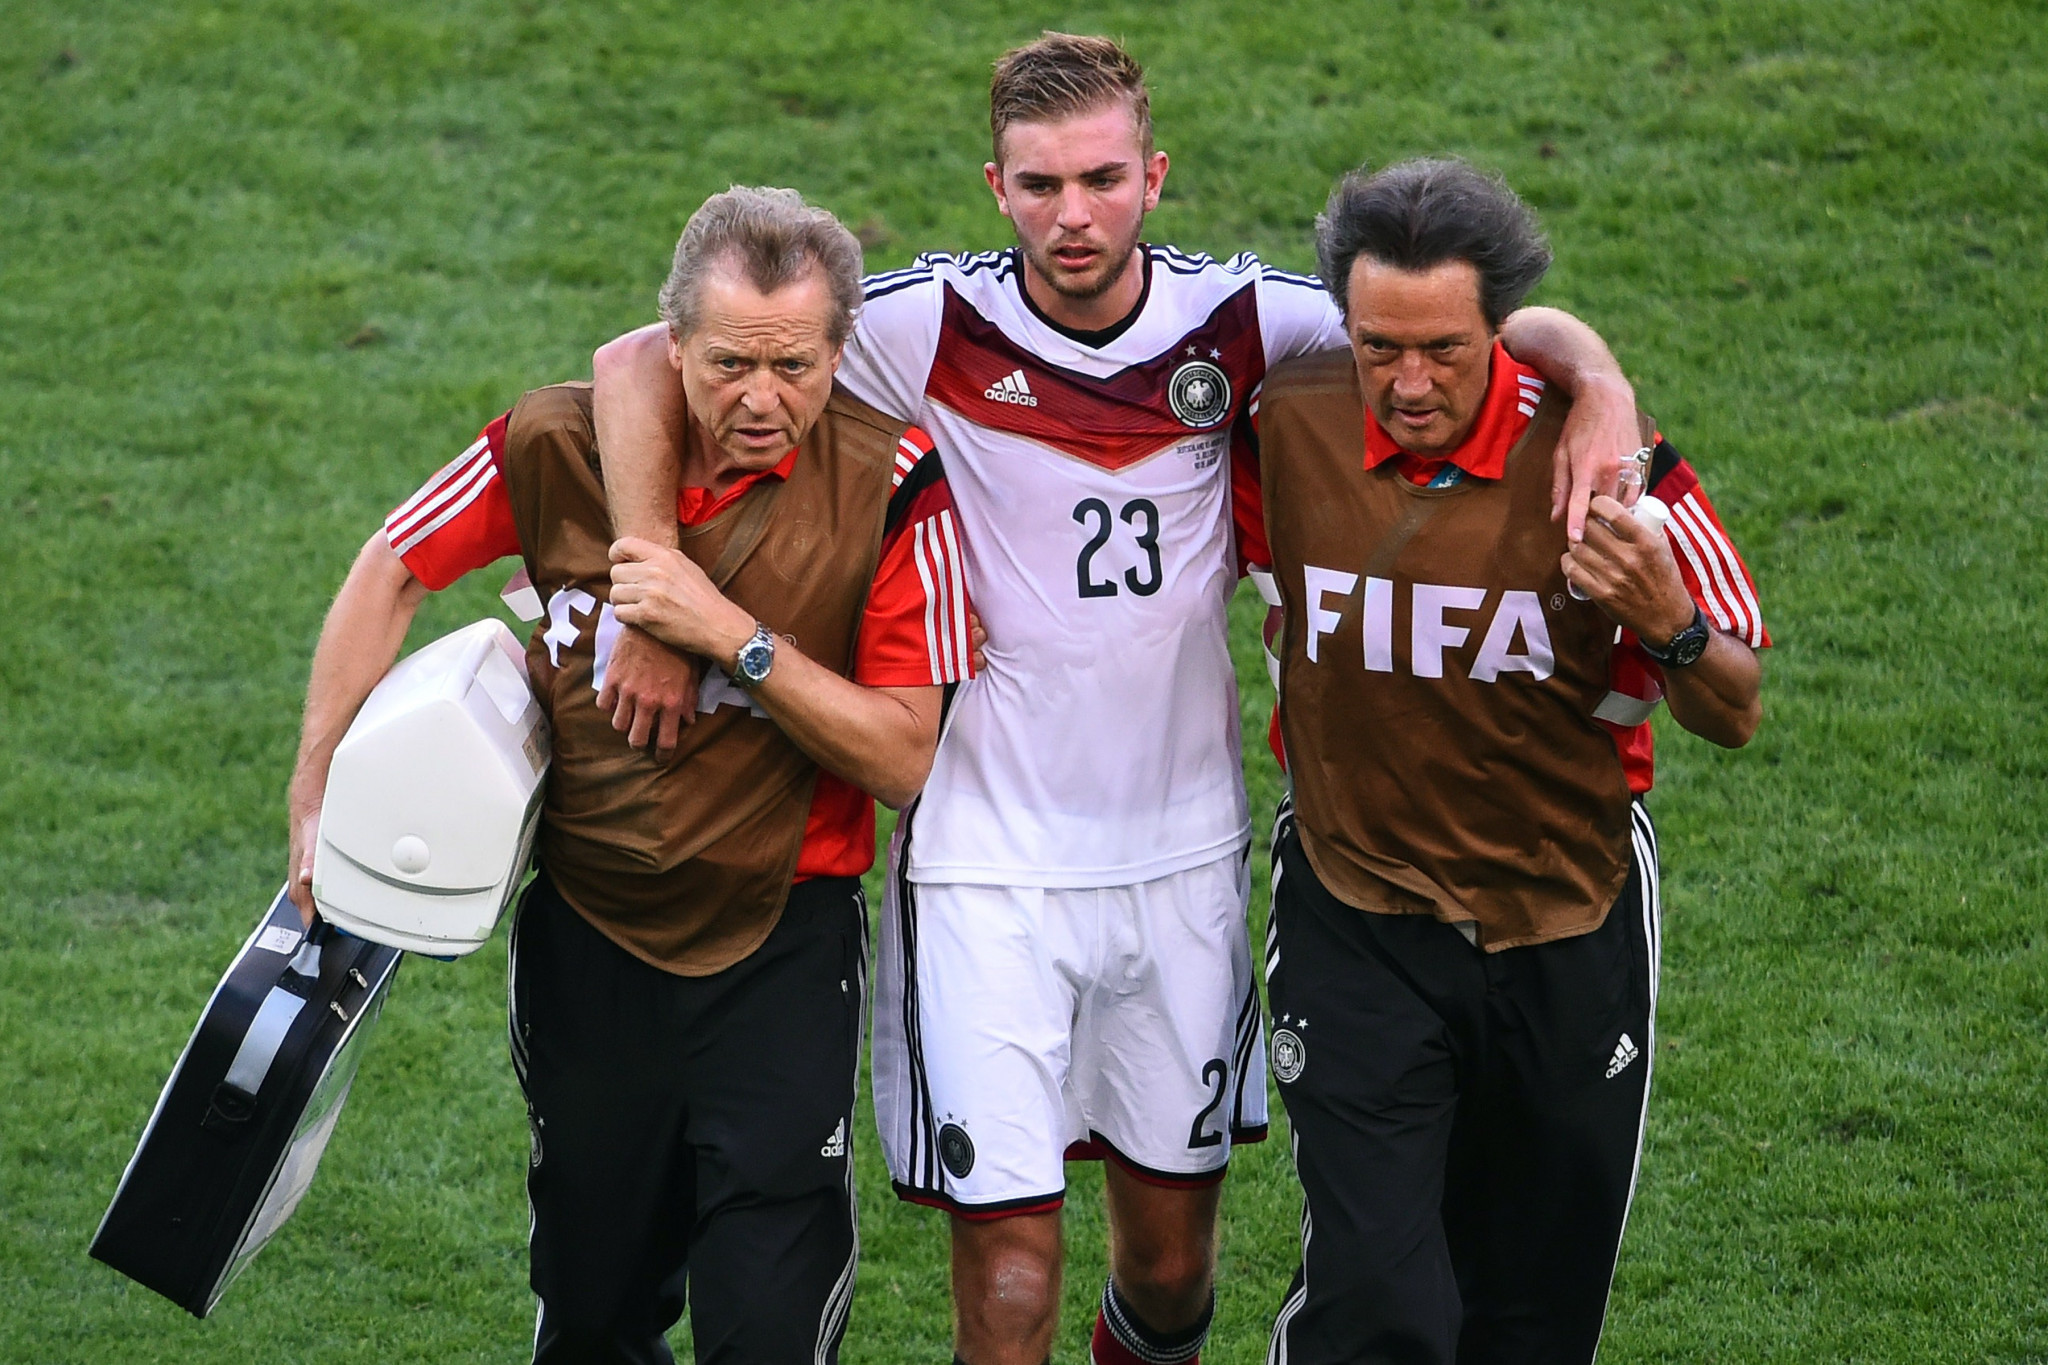 After suffering a head injury in the 2014 FIFA World Cup final - and asking the referee if it was indeed the final, as he was dazed - Germany's Christoph Kramer was allowed to play on for fourteen minutes before collapsing and only then being taken off  ©Getty Images